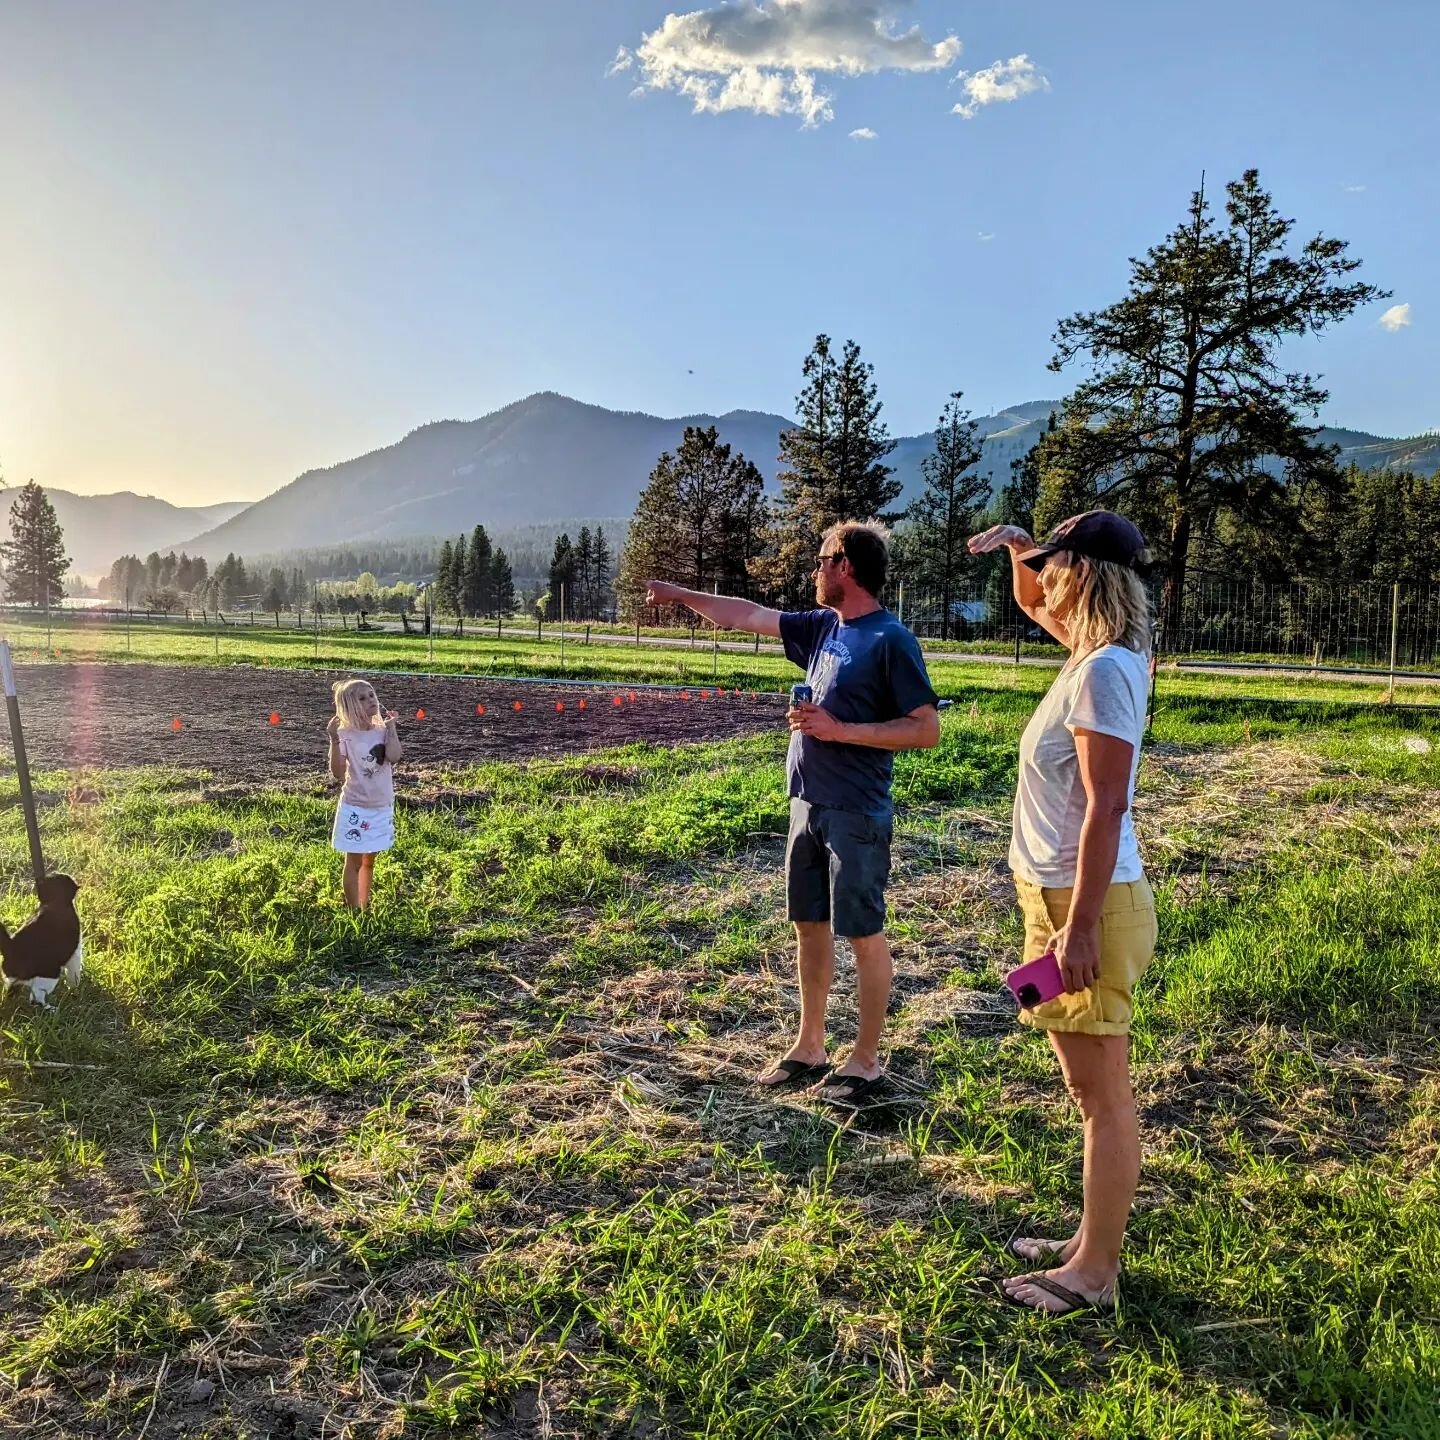 Early season farm tour with our friend and chef. Local food collaboration is the core of what we do. We are so grateful for these opportunities and for those who support local agriculture. Thank you True Food Missoula. &hearts;️🙌☀️🌱🙏